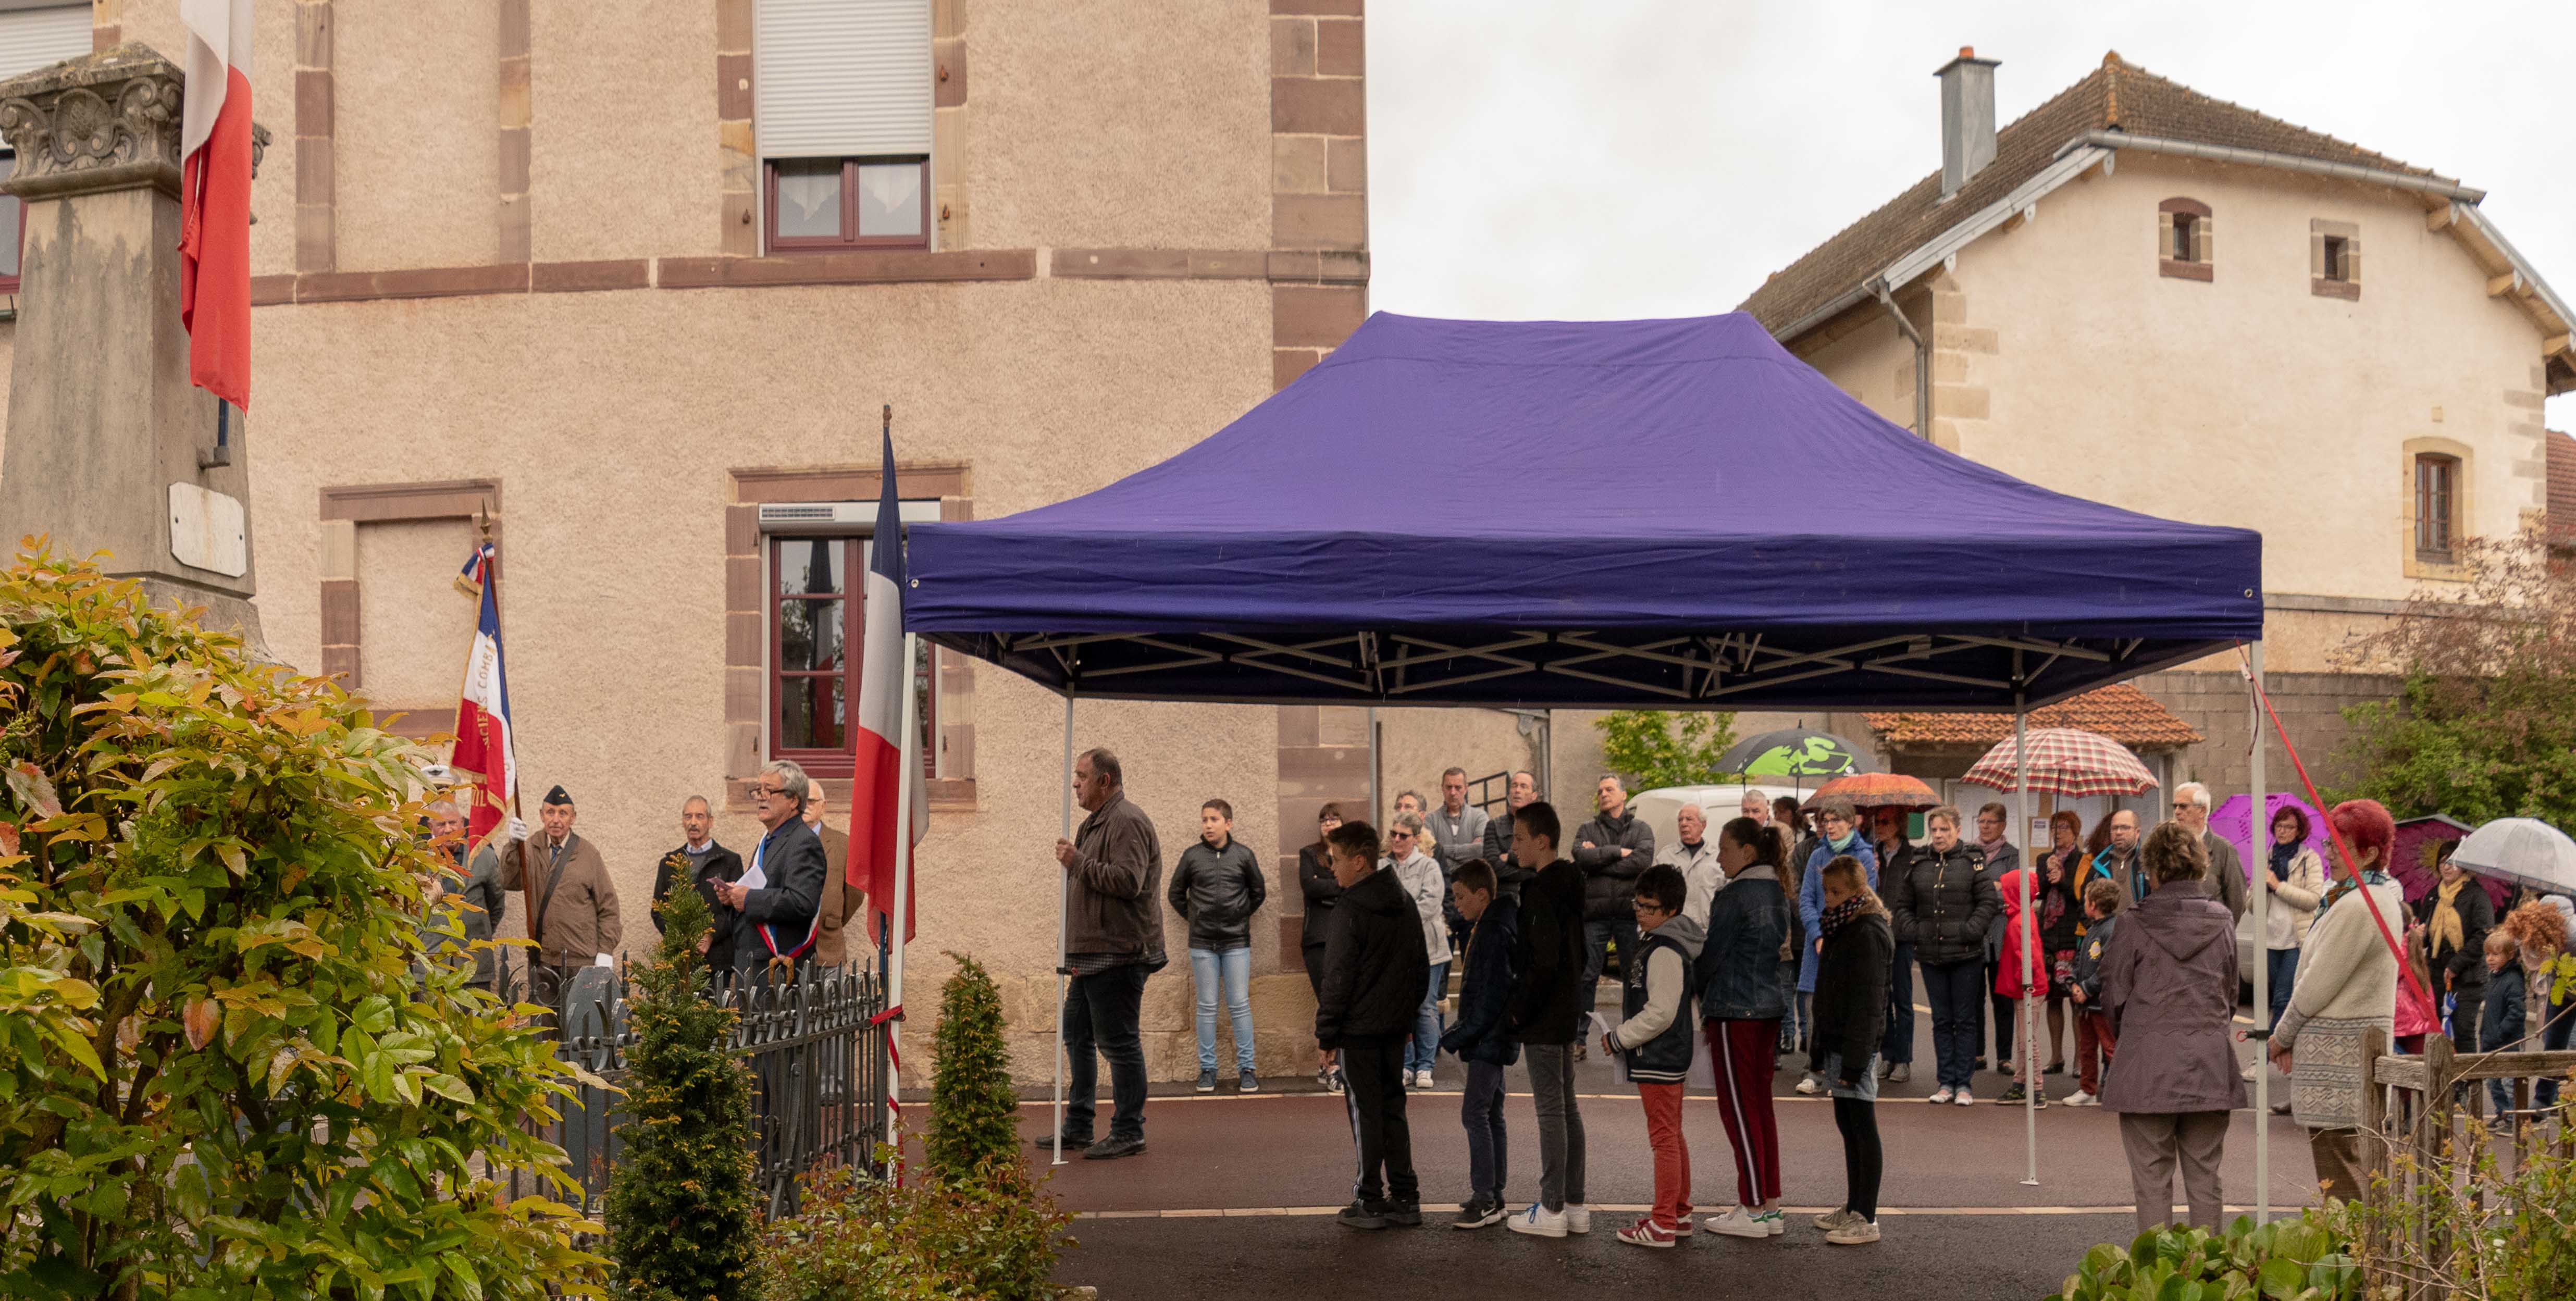 https://www.villers-les-luxeuil.com/projets/villers/files/images/2019_Evenements/05_8mai/JEF_5313_Panorama.jpg